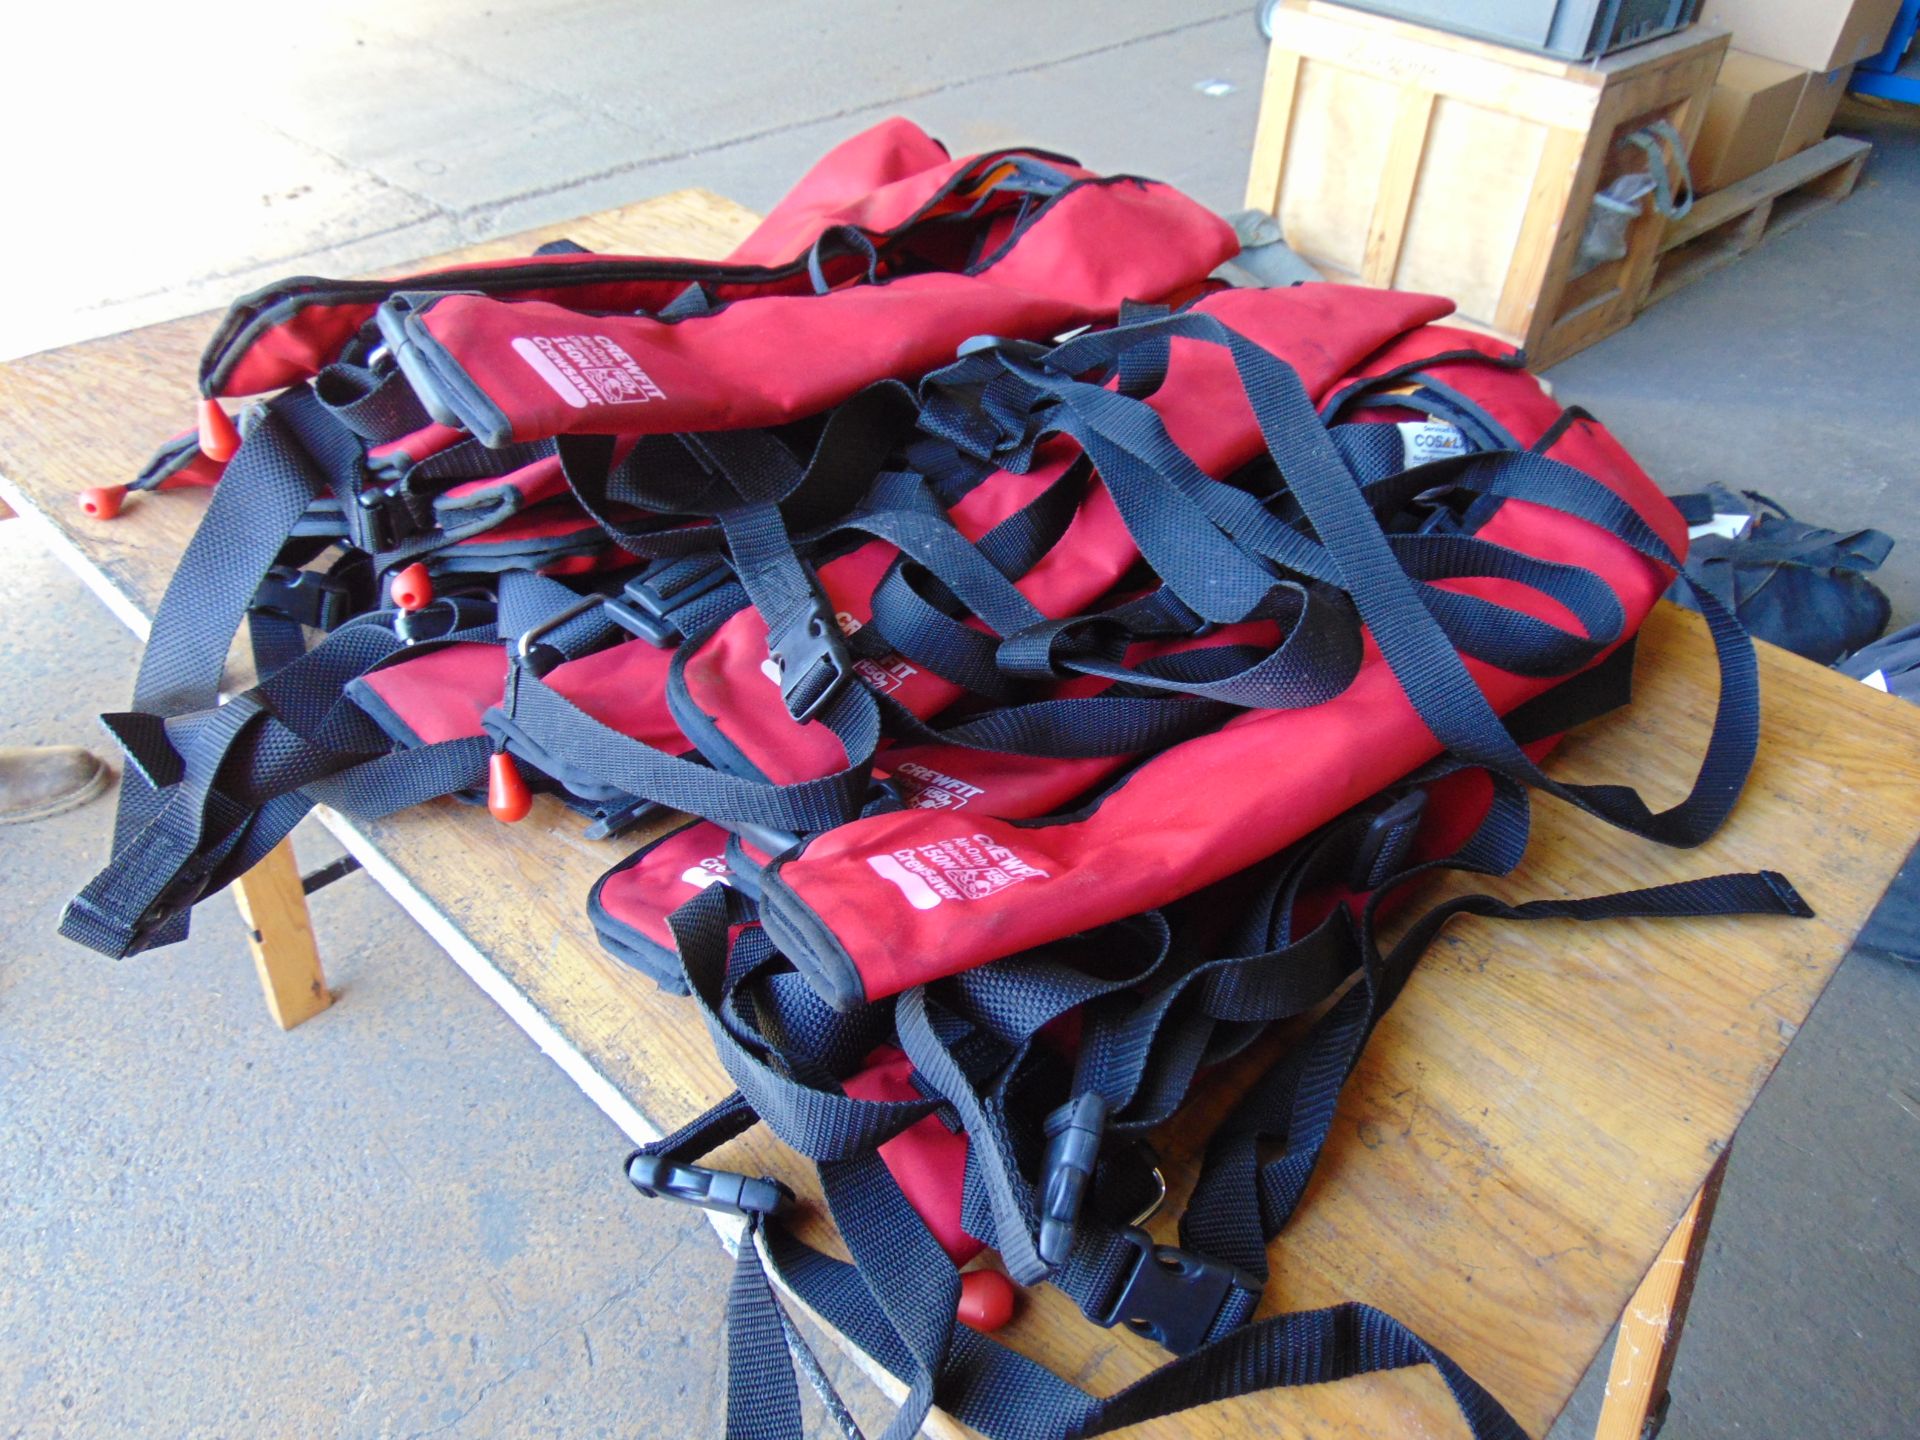 6 x Crew Saver 150 N Life Jackets from UK Fire / Rescue Services - Image 6 of 6